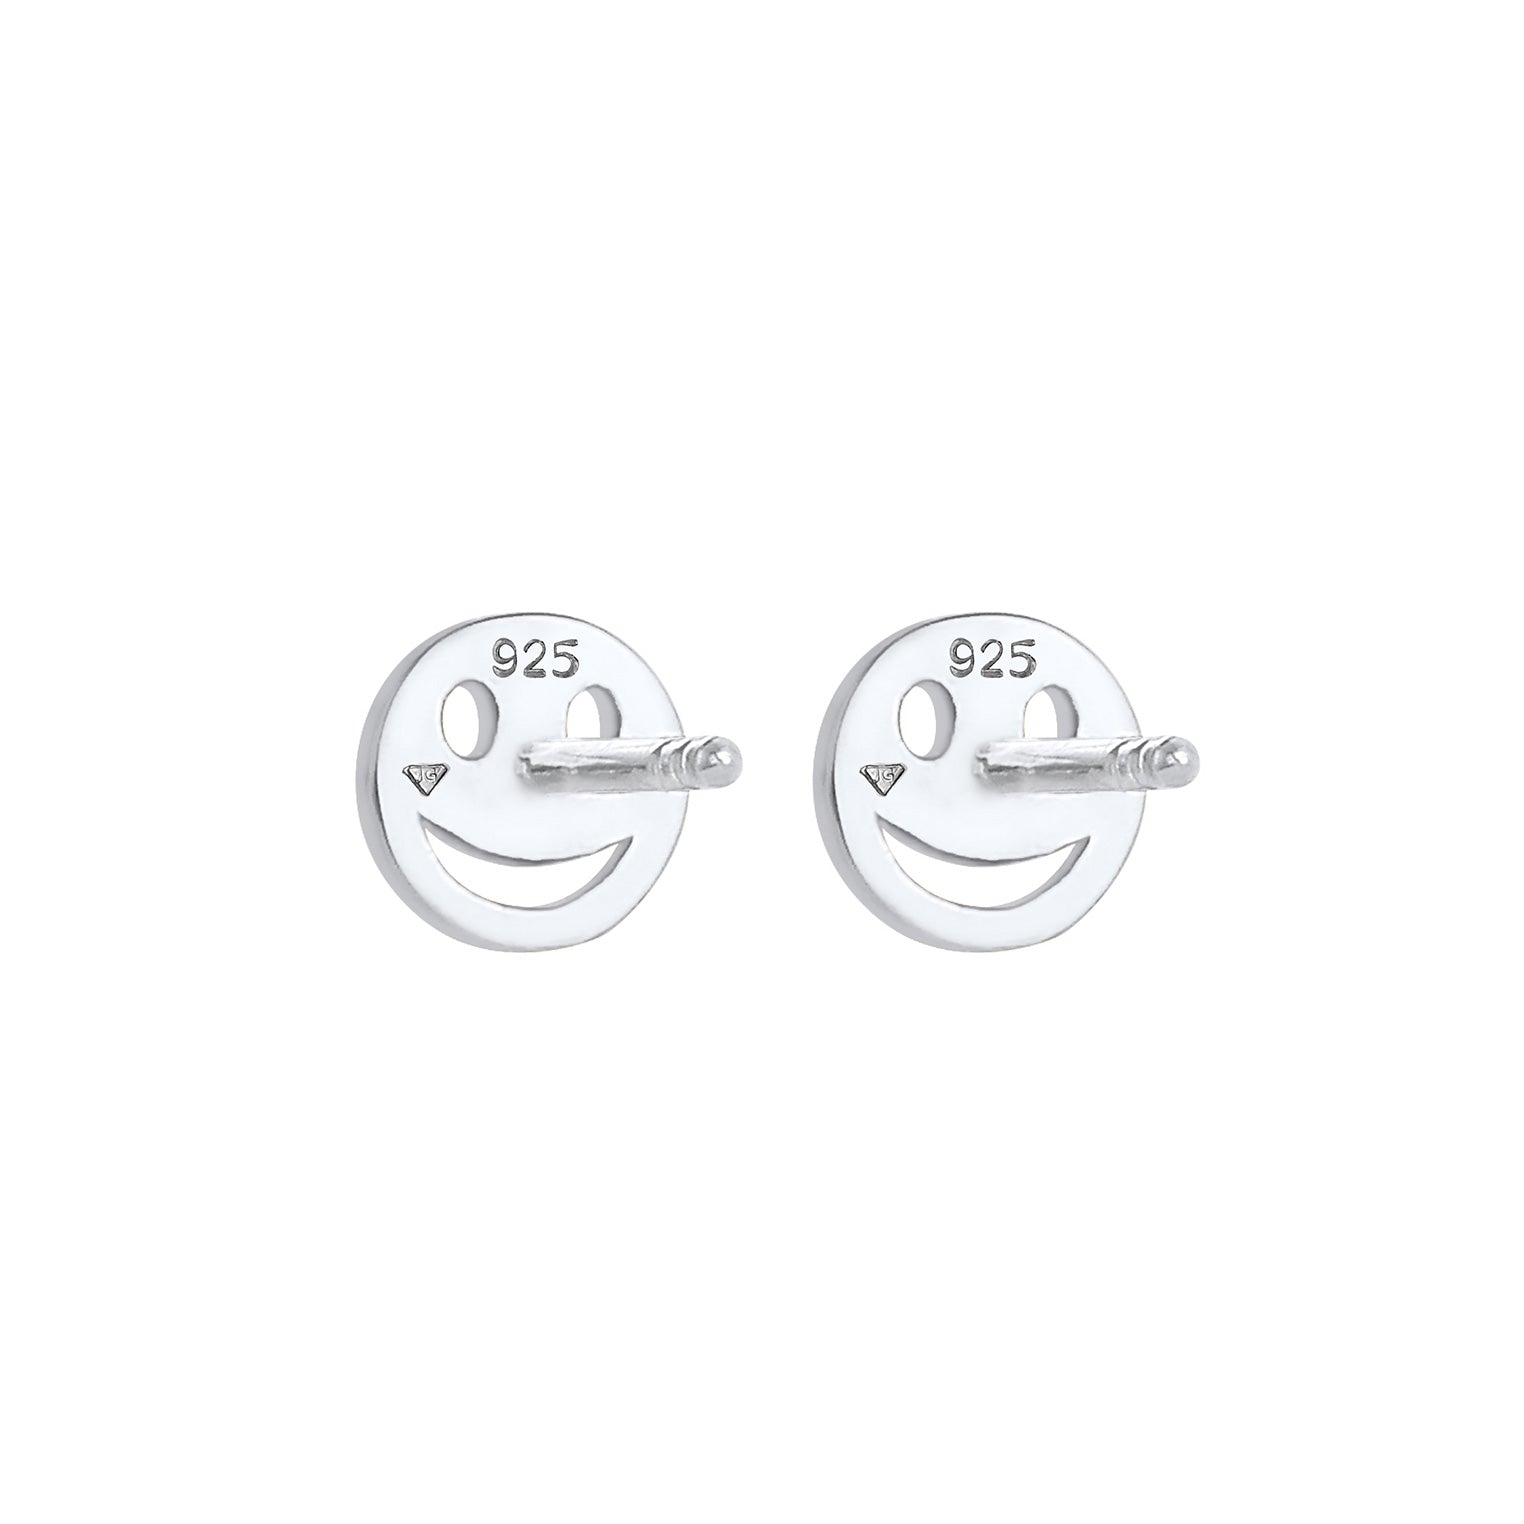 Ohrring mit Smiling Elli Face – Jewelry